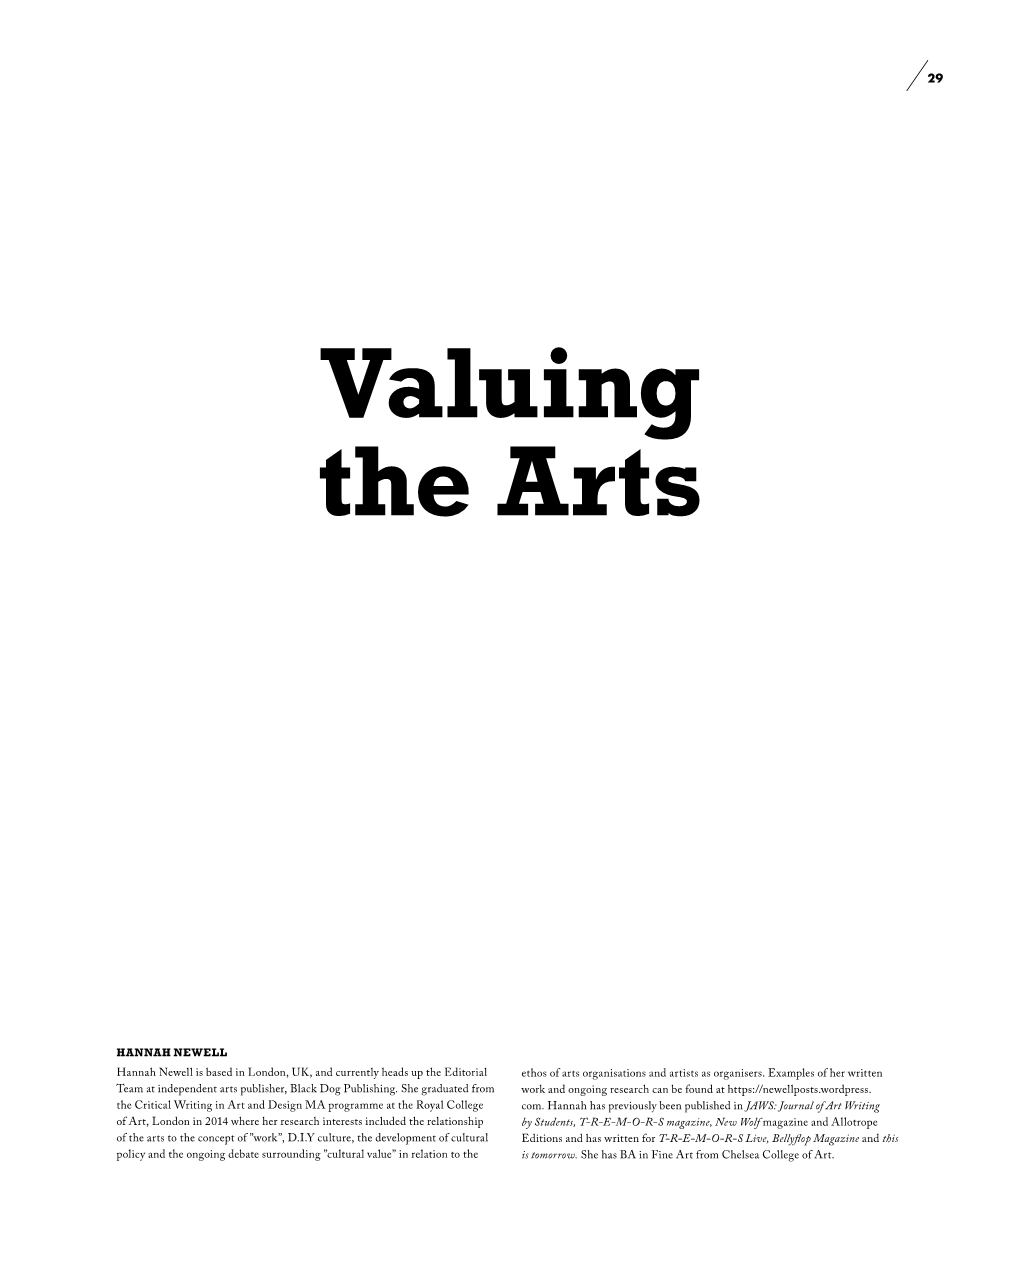 Valuing the Arts